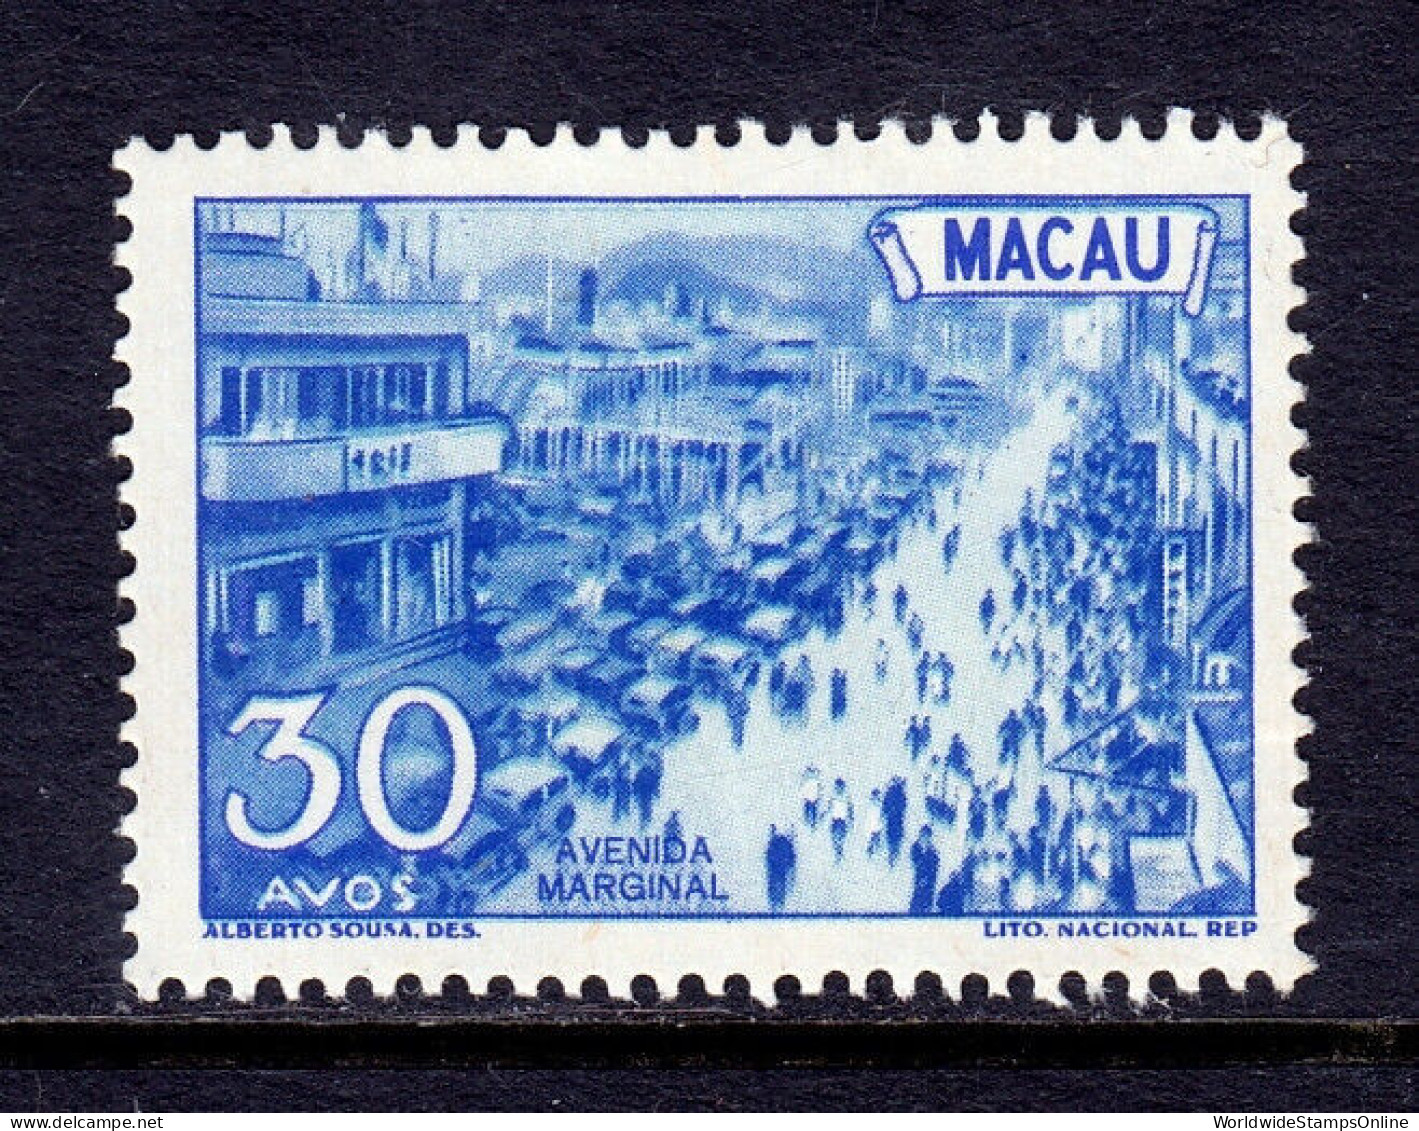 MACAO — SCOTT 346 —  1950 30a MARGINAL AVE PICTORIAL — MH — SCV $28 - Unused Stamps